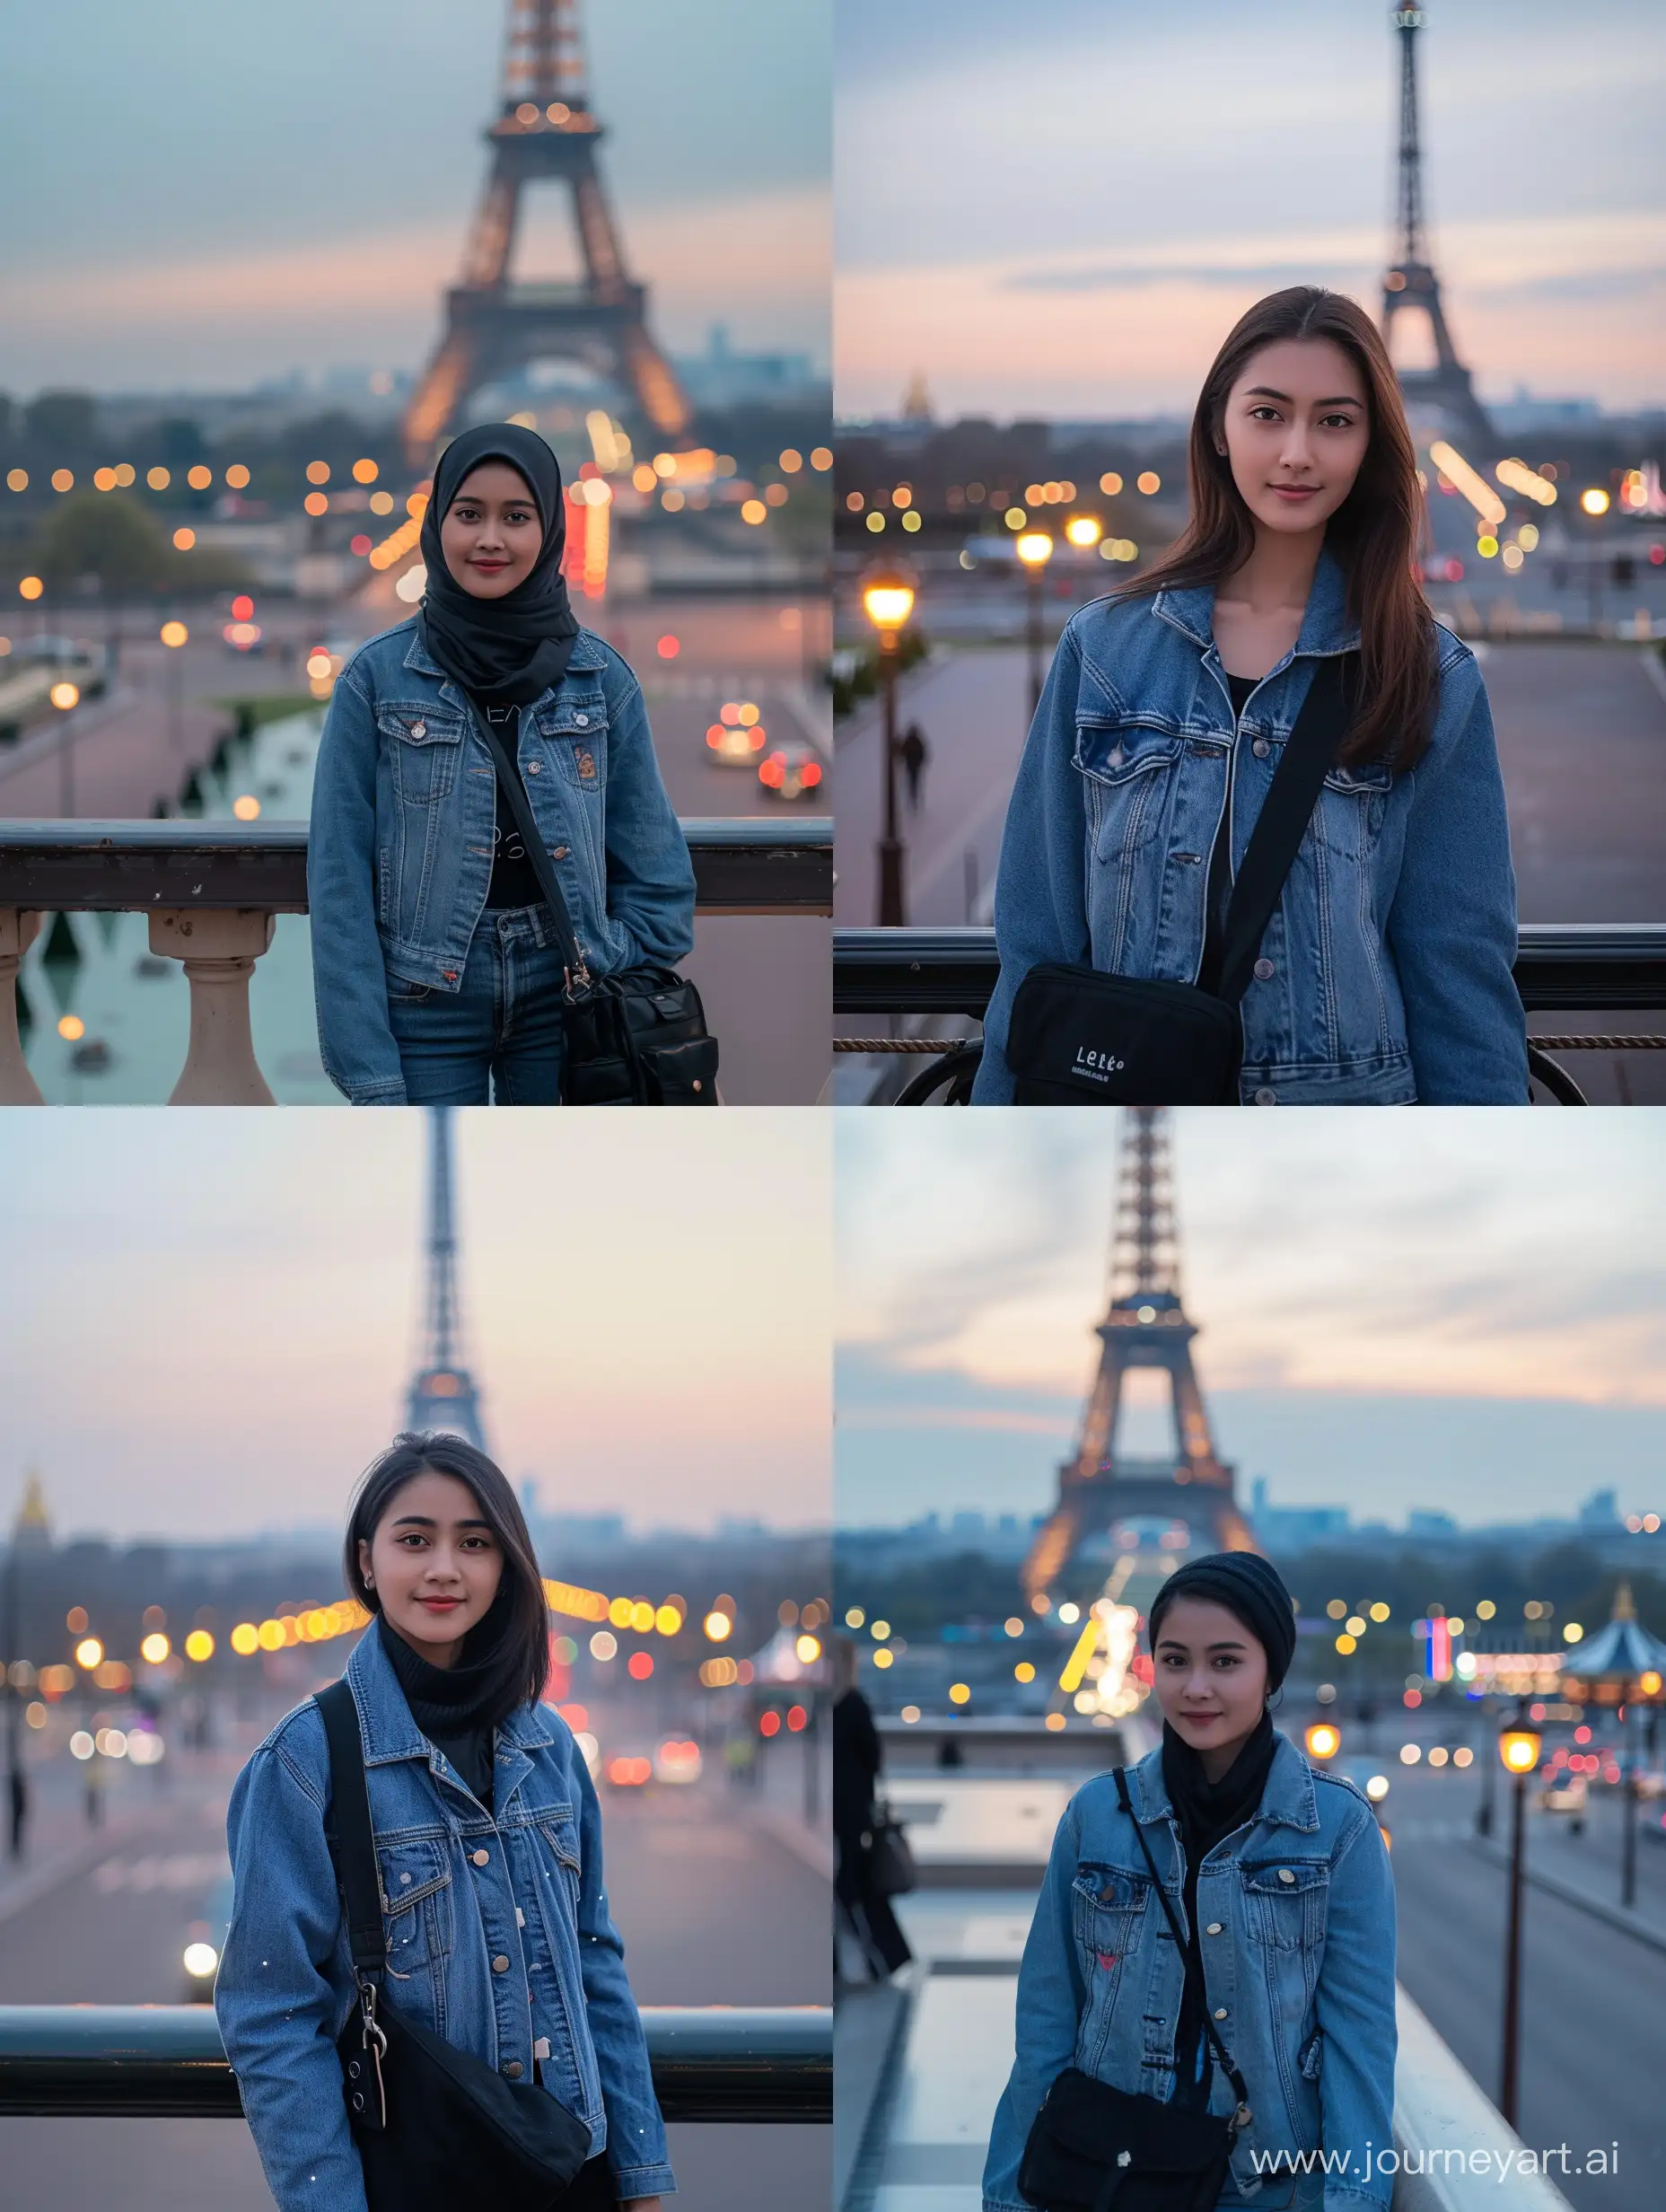 Stylish-Javanese-Woman-in-Denim-Jacket-with-Eiffel-Tower-View